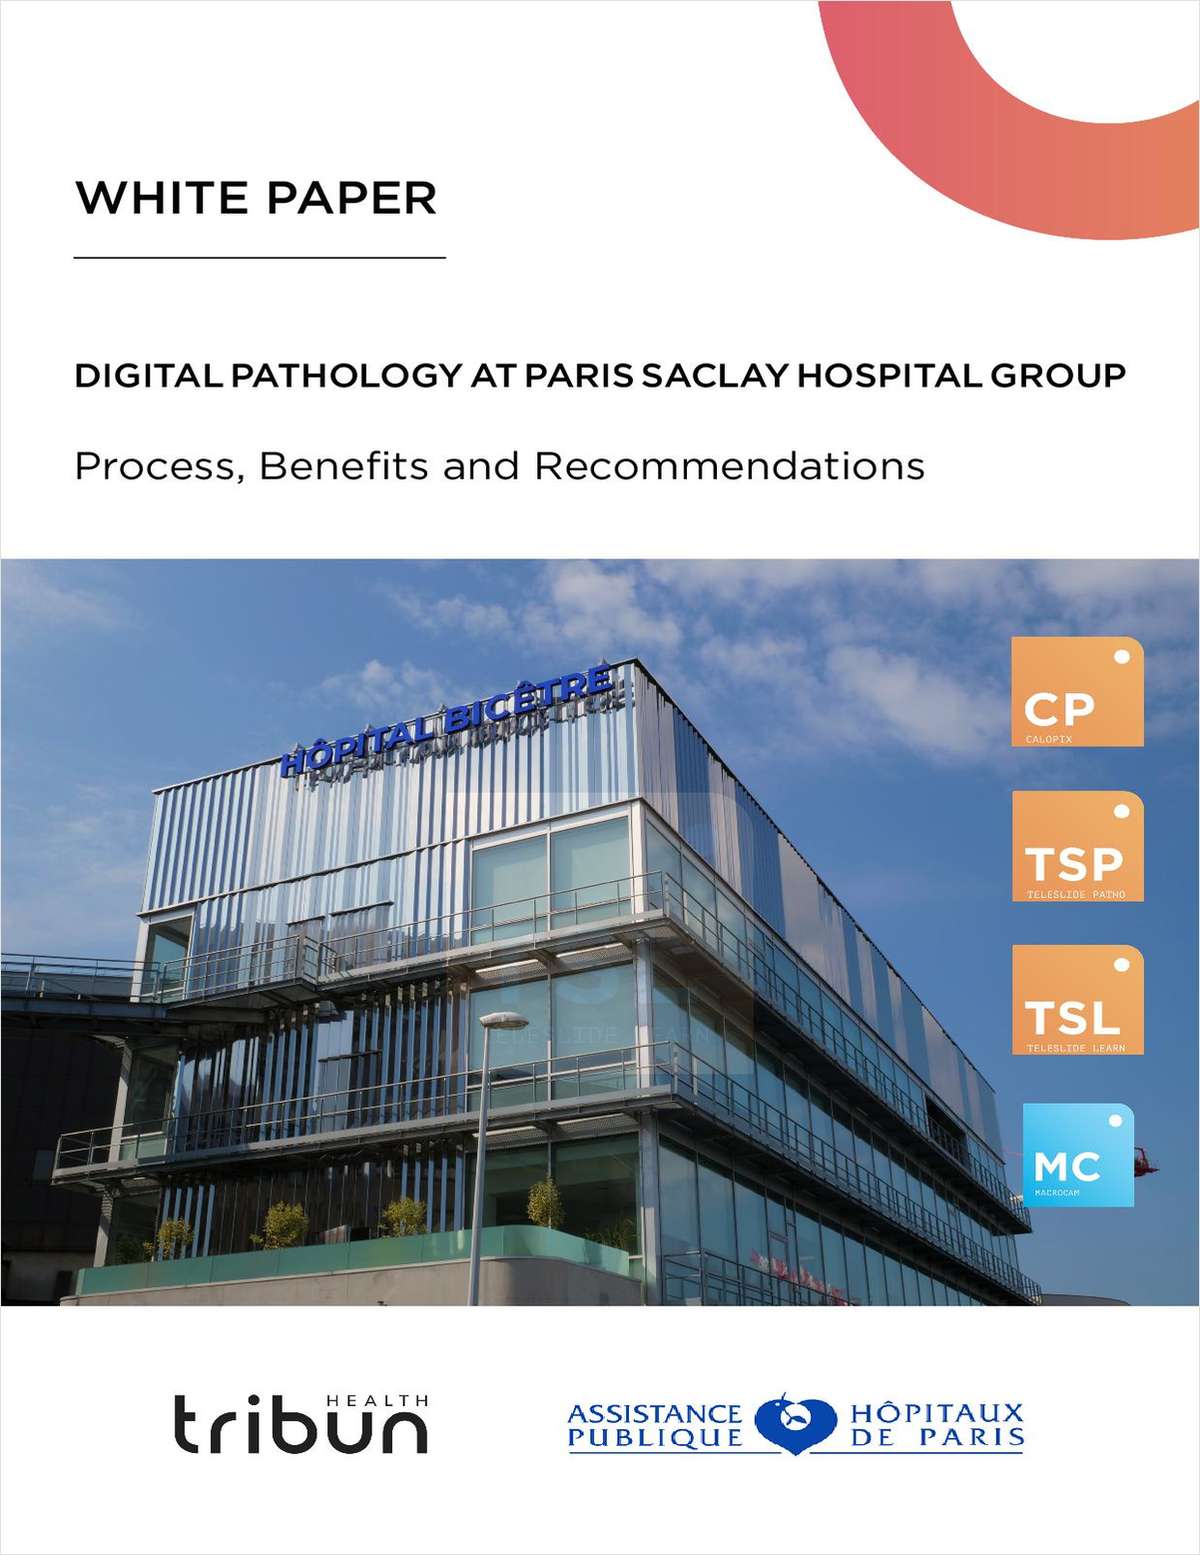 Digital Pathology at Paris Saclay Hospital Group: Process, Benefits, and Recommendations